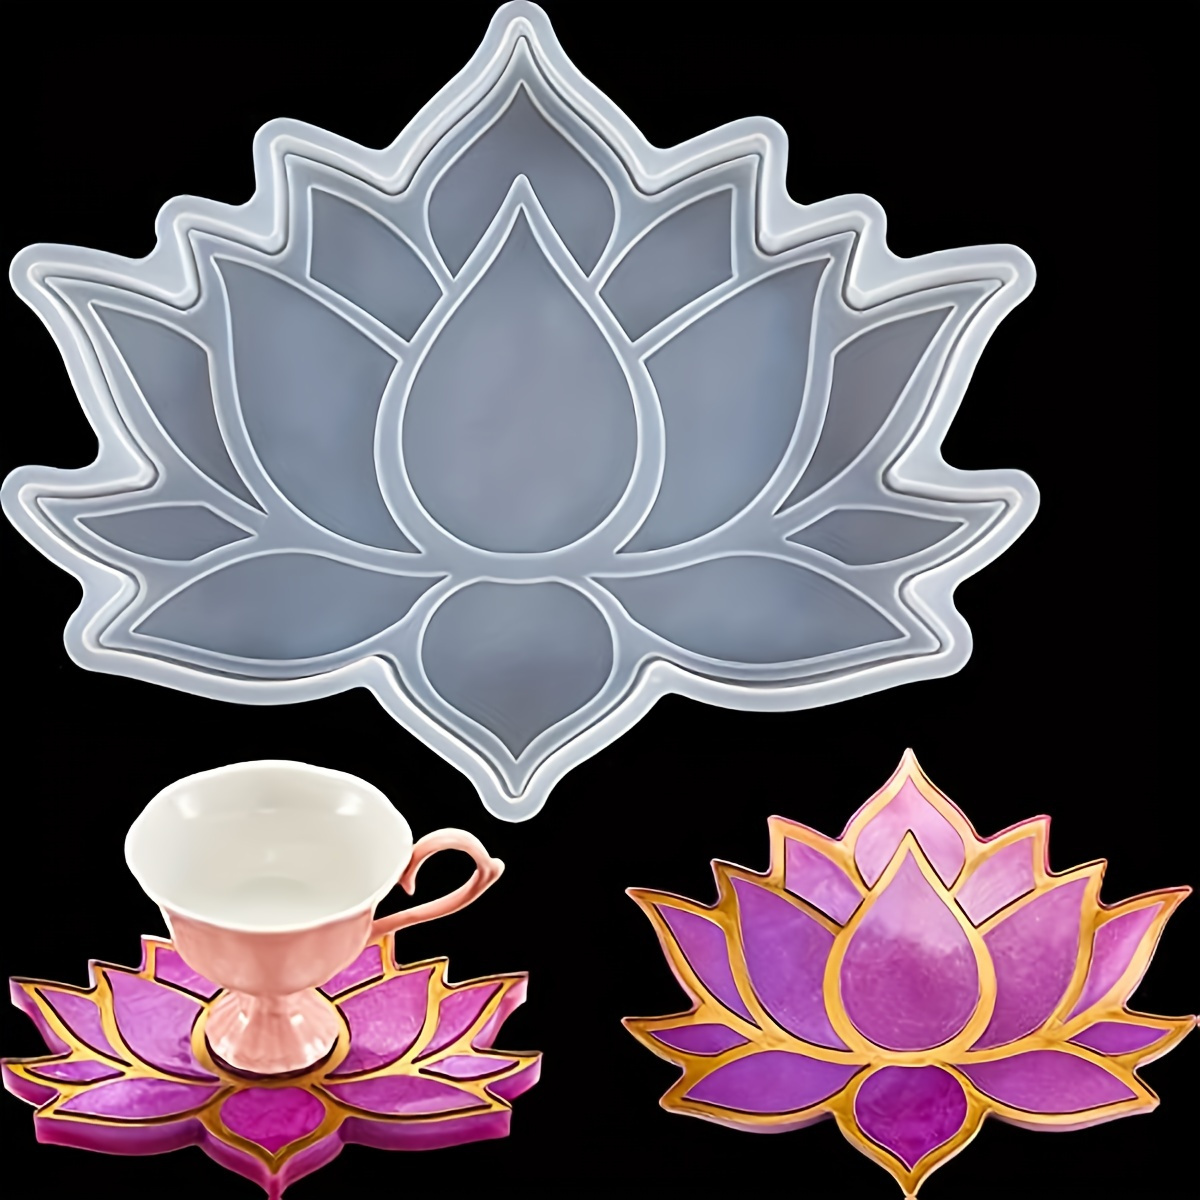 

Lotus Flower Coaster Mold Epoxy Resin Casting Silicone Mold Cup Mat Mold Diy Crafts Decoration Making